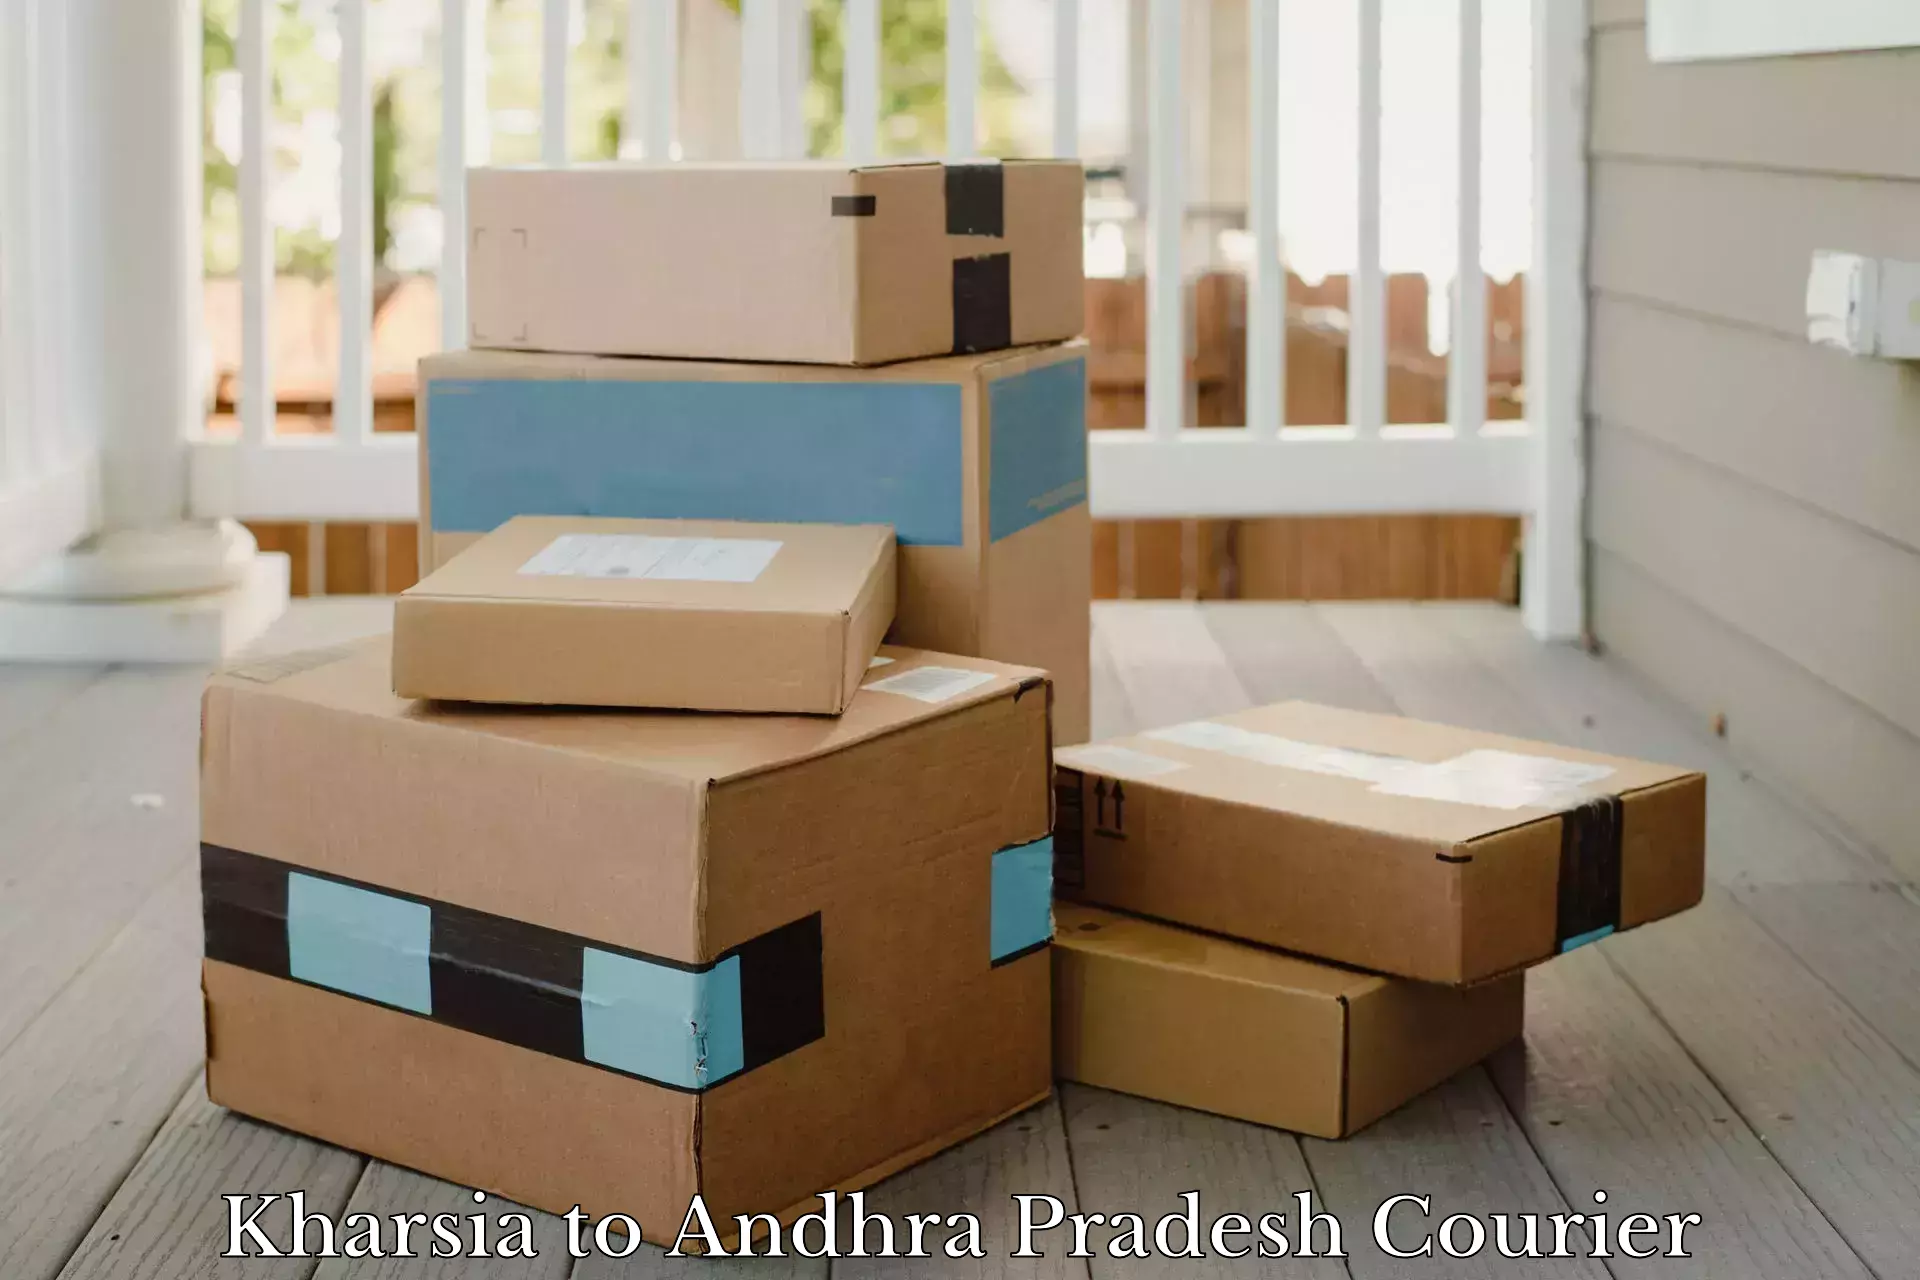 Nationwide courier service in Kharsia to Andhra Pradesh